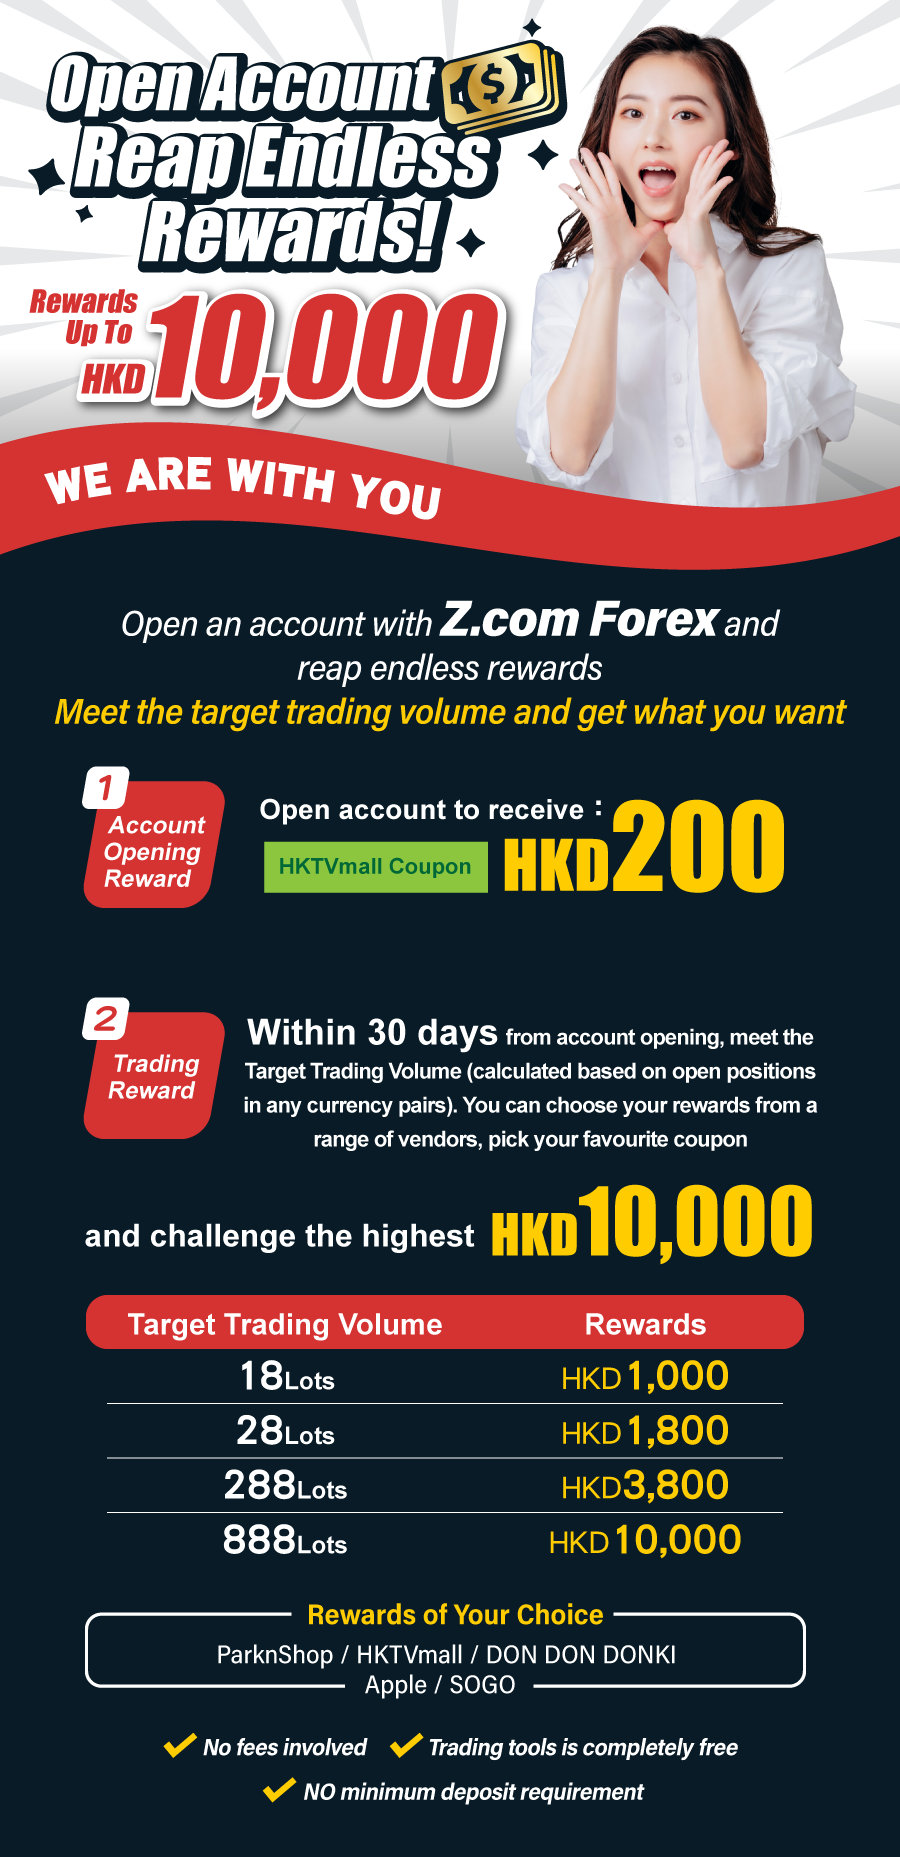 Up To HKD10,000 Account Opening Double Rewards